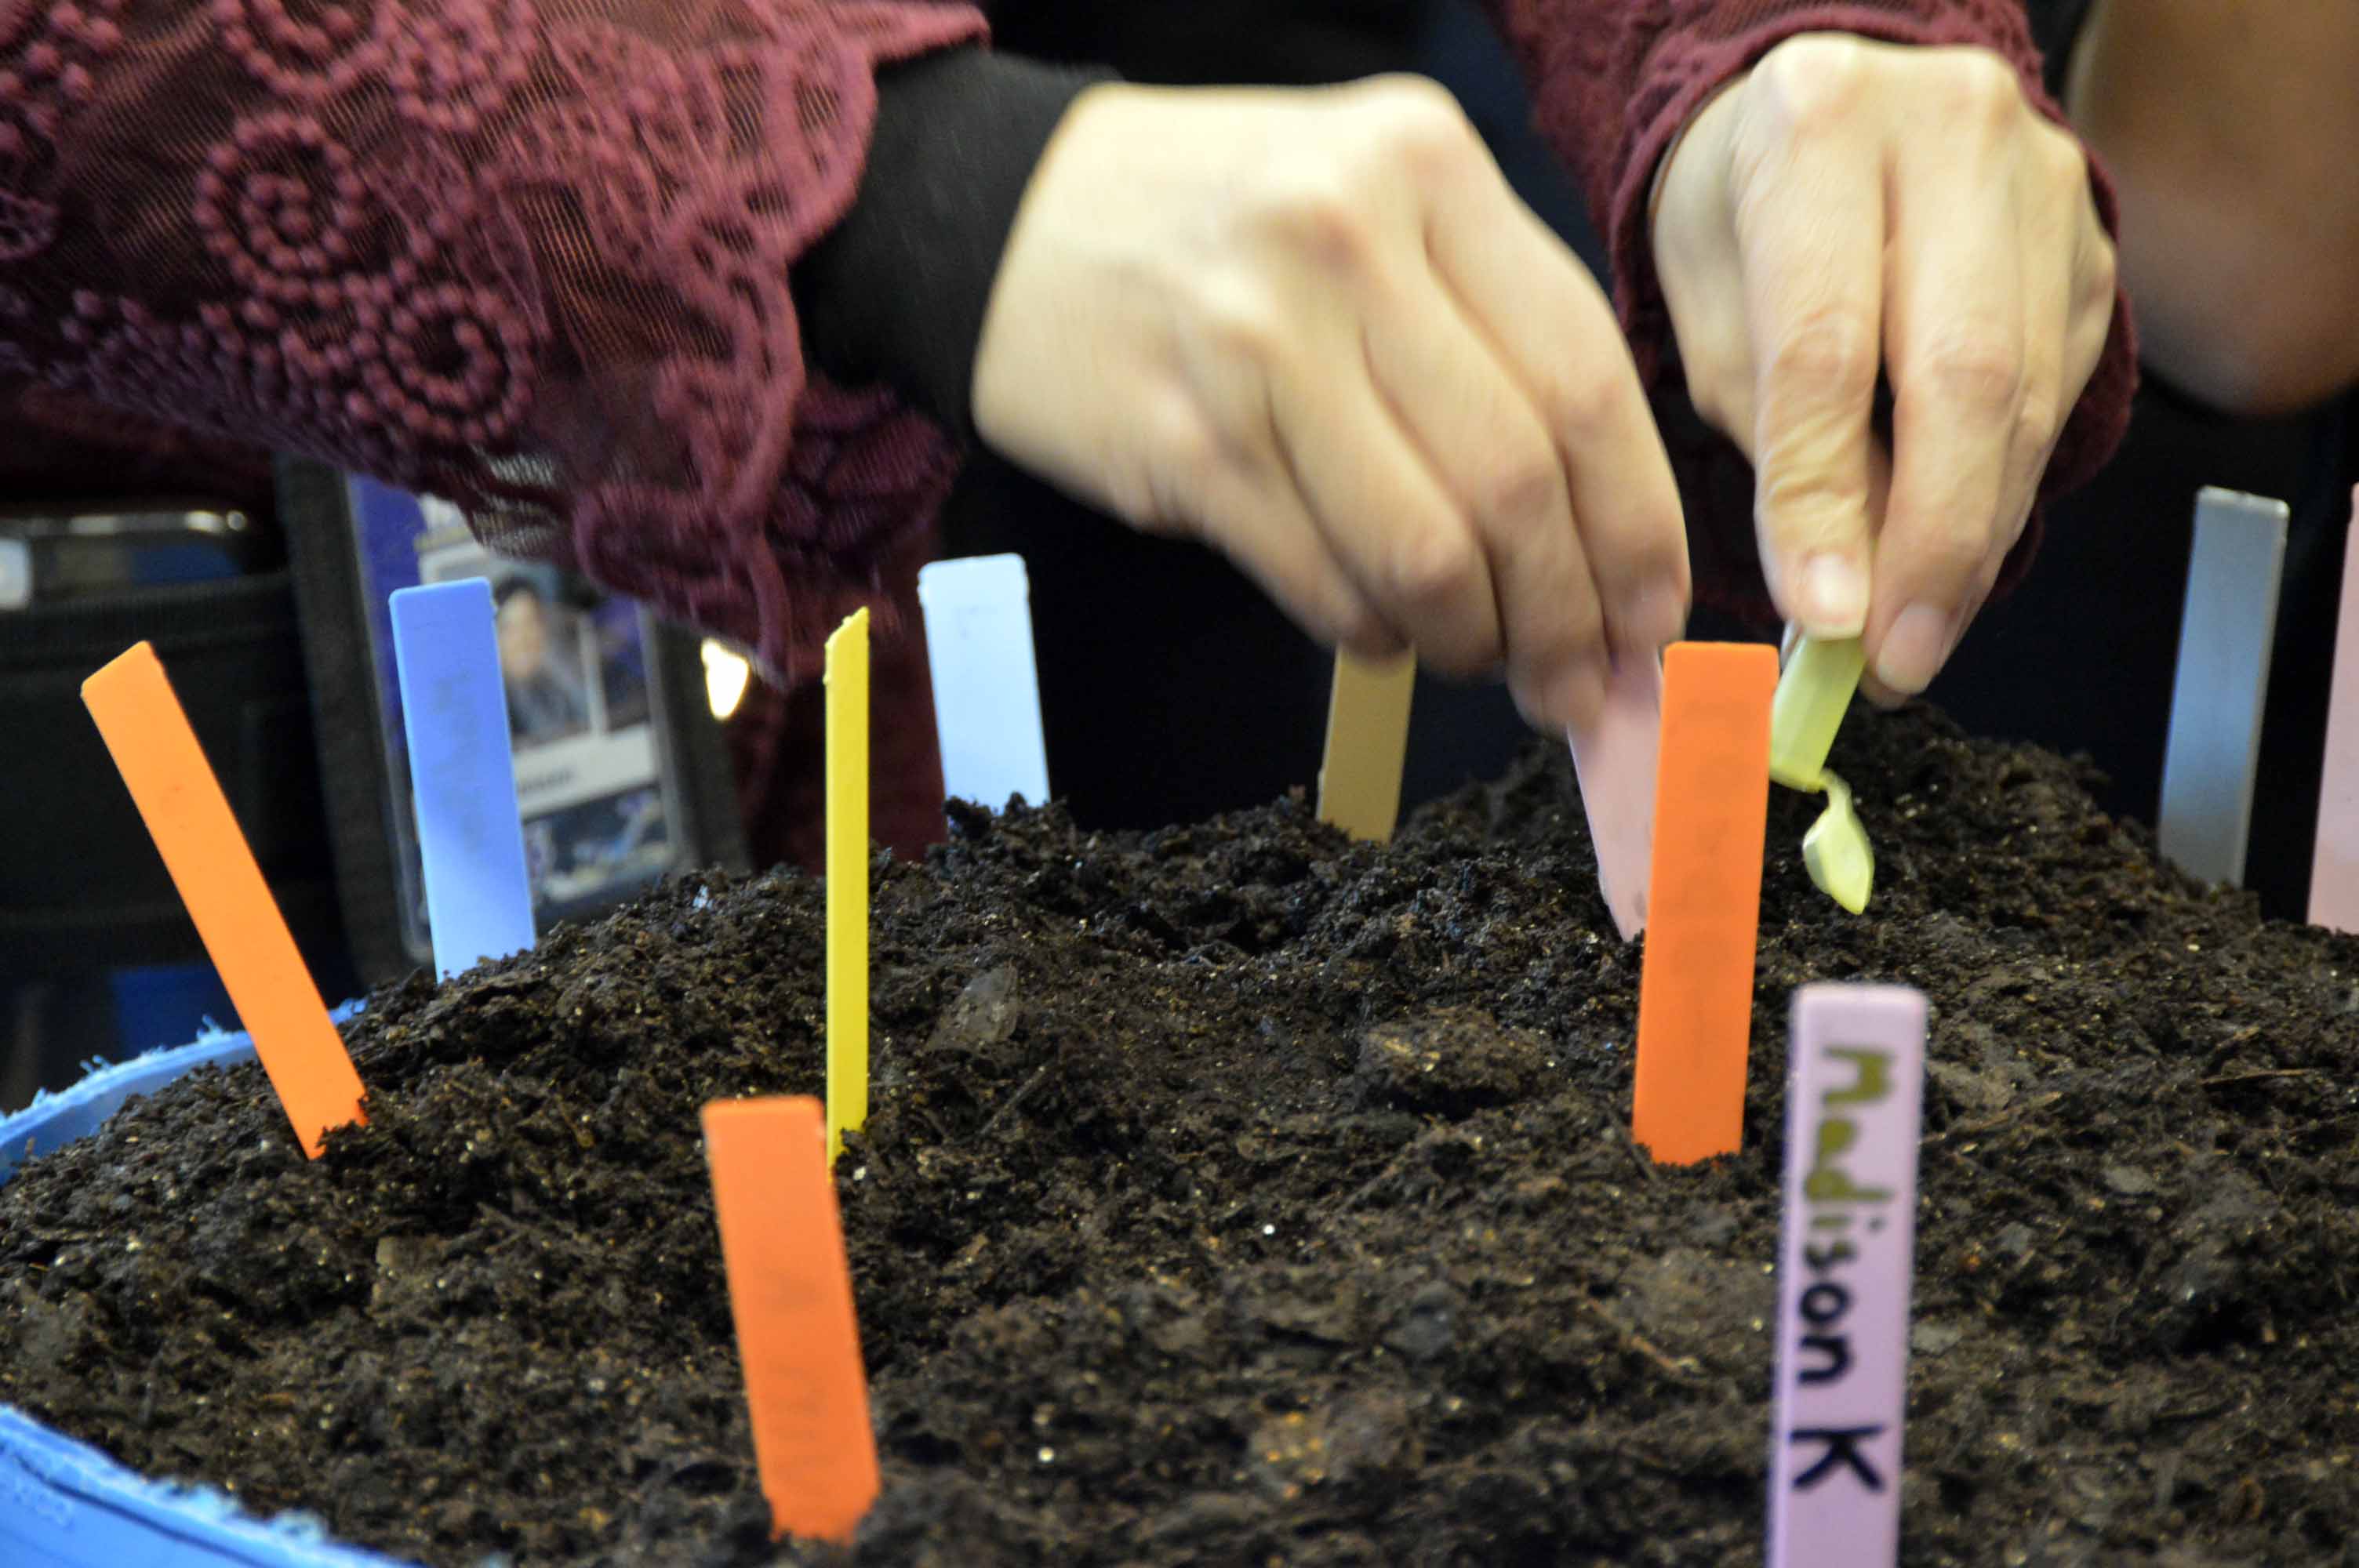 Science projects aims to help families learn to grow their own food